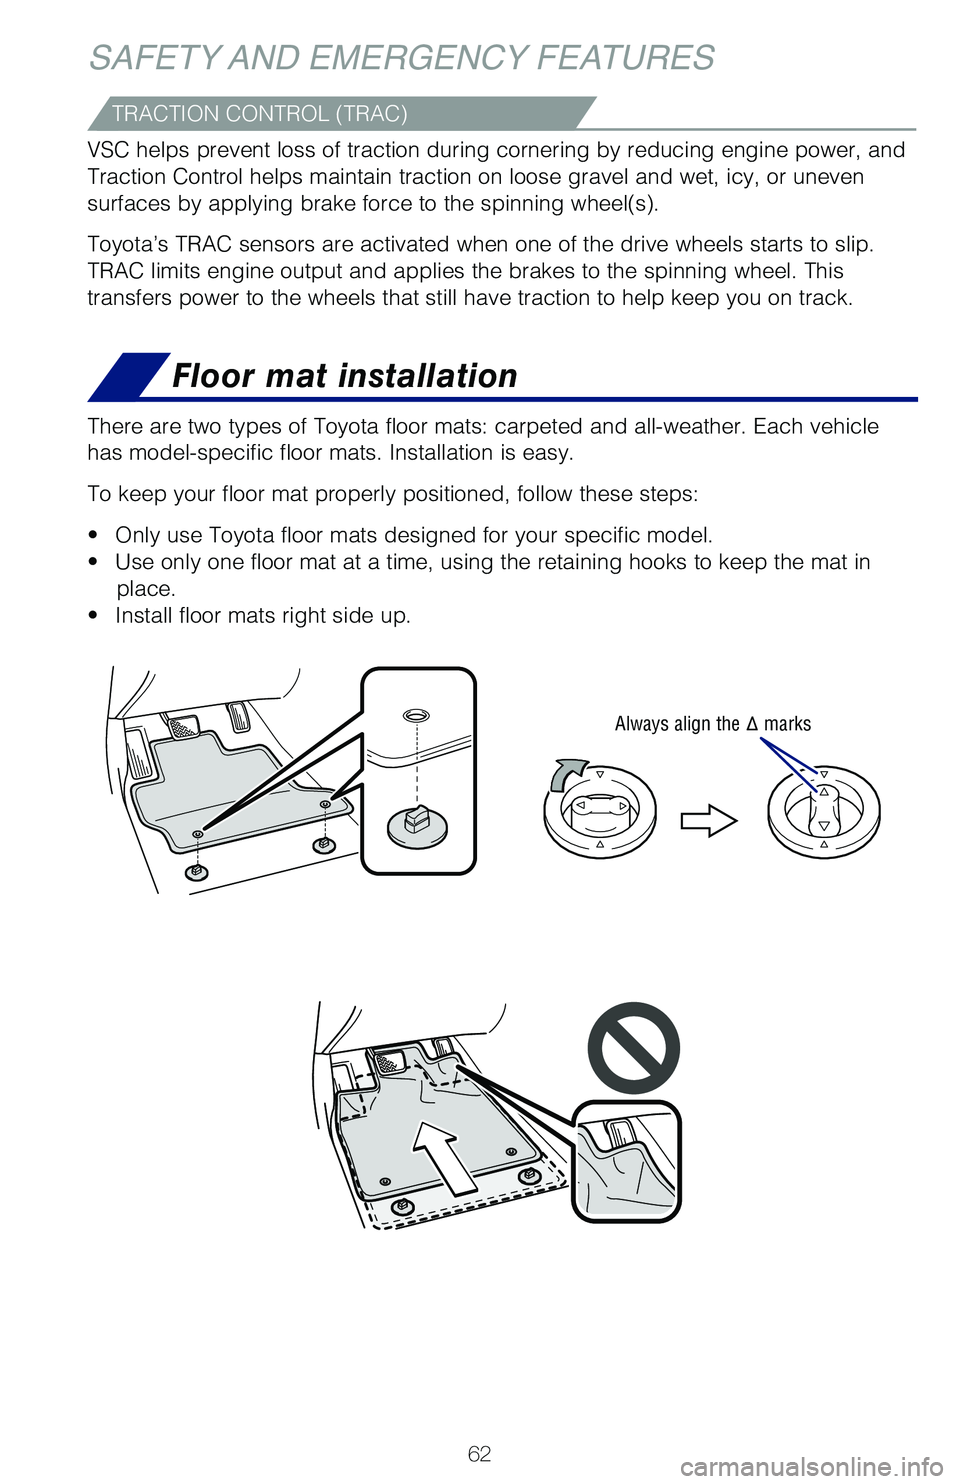 TOYOTA HIGHLANDER 2021  Owners Manual (in English) 62
SAFETY AND EMERGENCY FEATURES
Floor mat installation
There are two types of Toyota floor mats: carpeted and all-weather. Each vehicle 
has model-specific floor mats. Installation is easy. 
To keep 